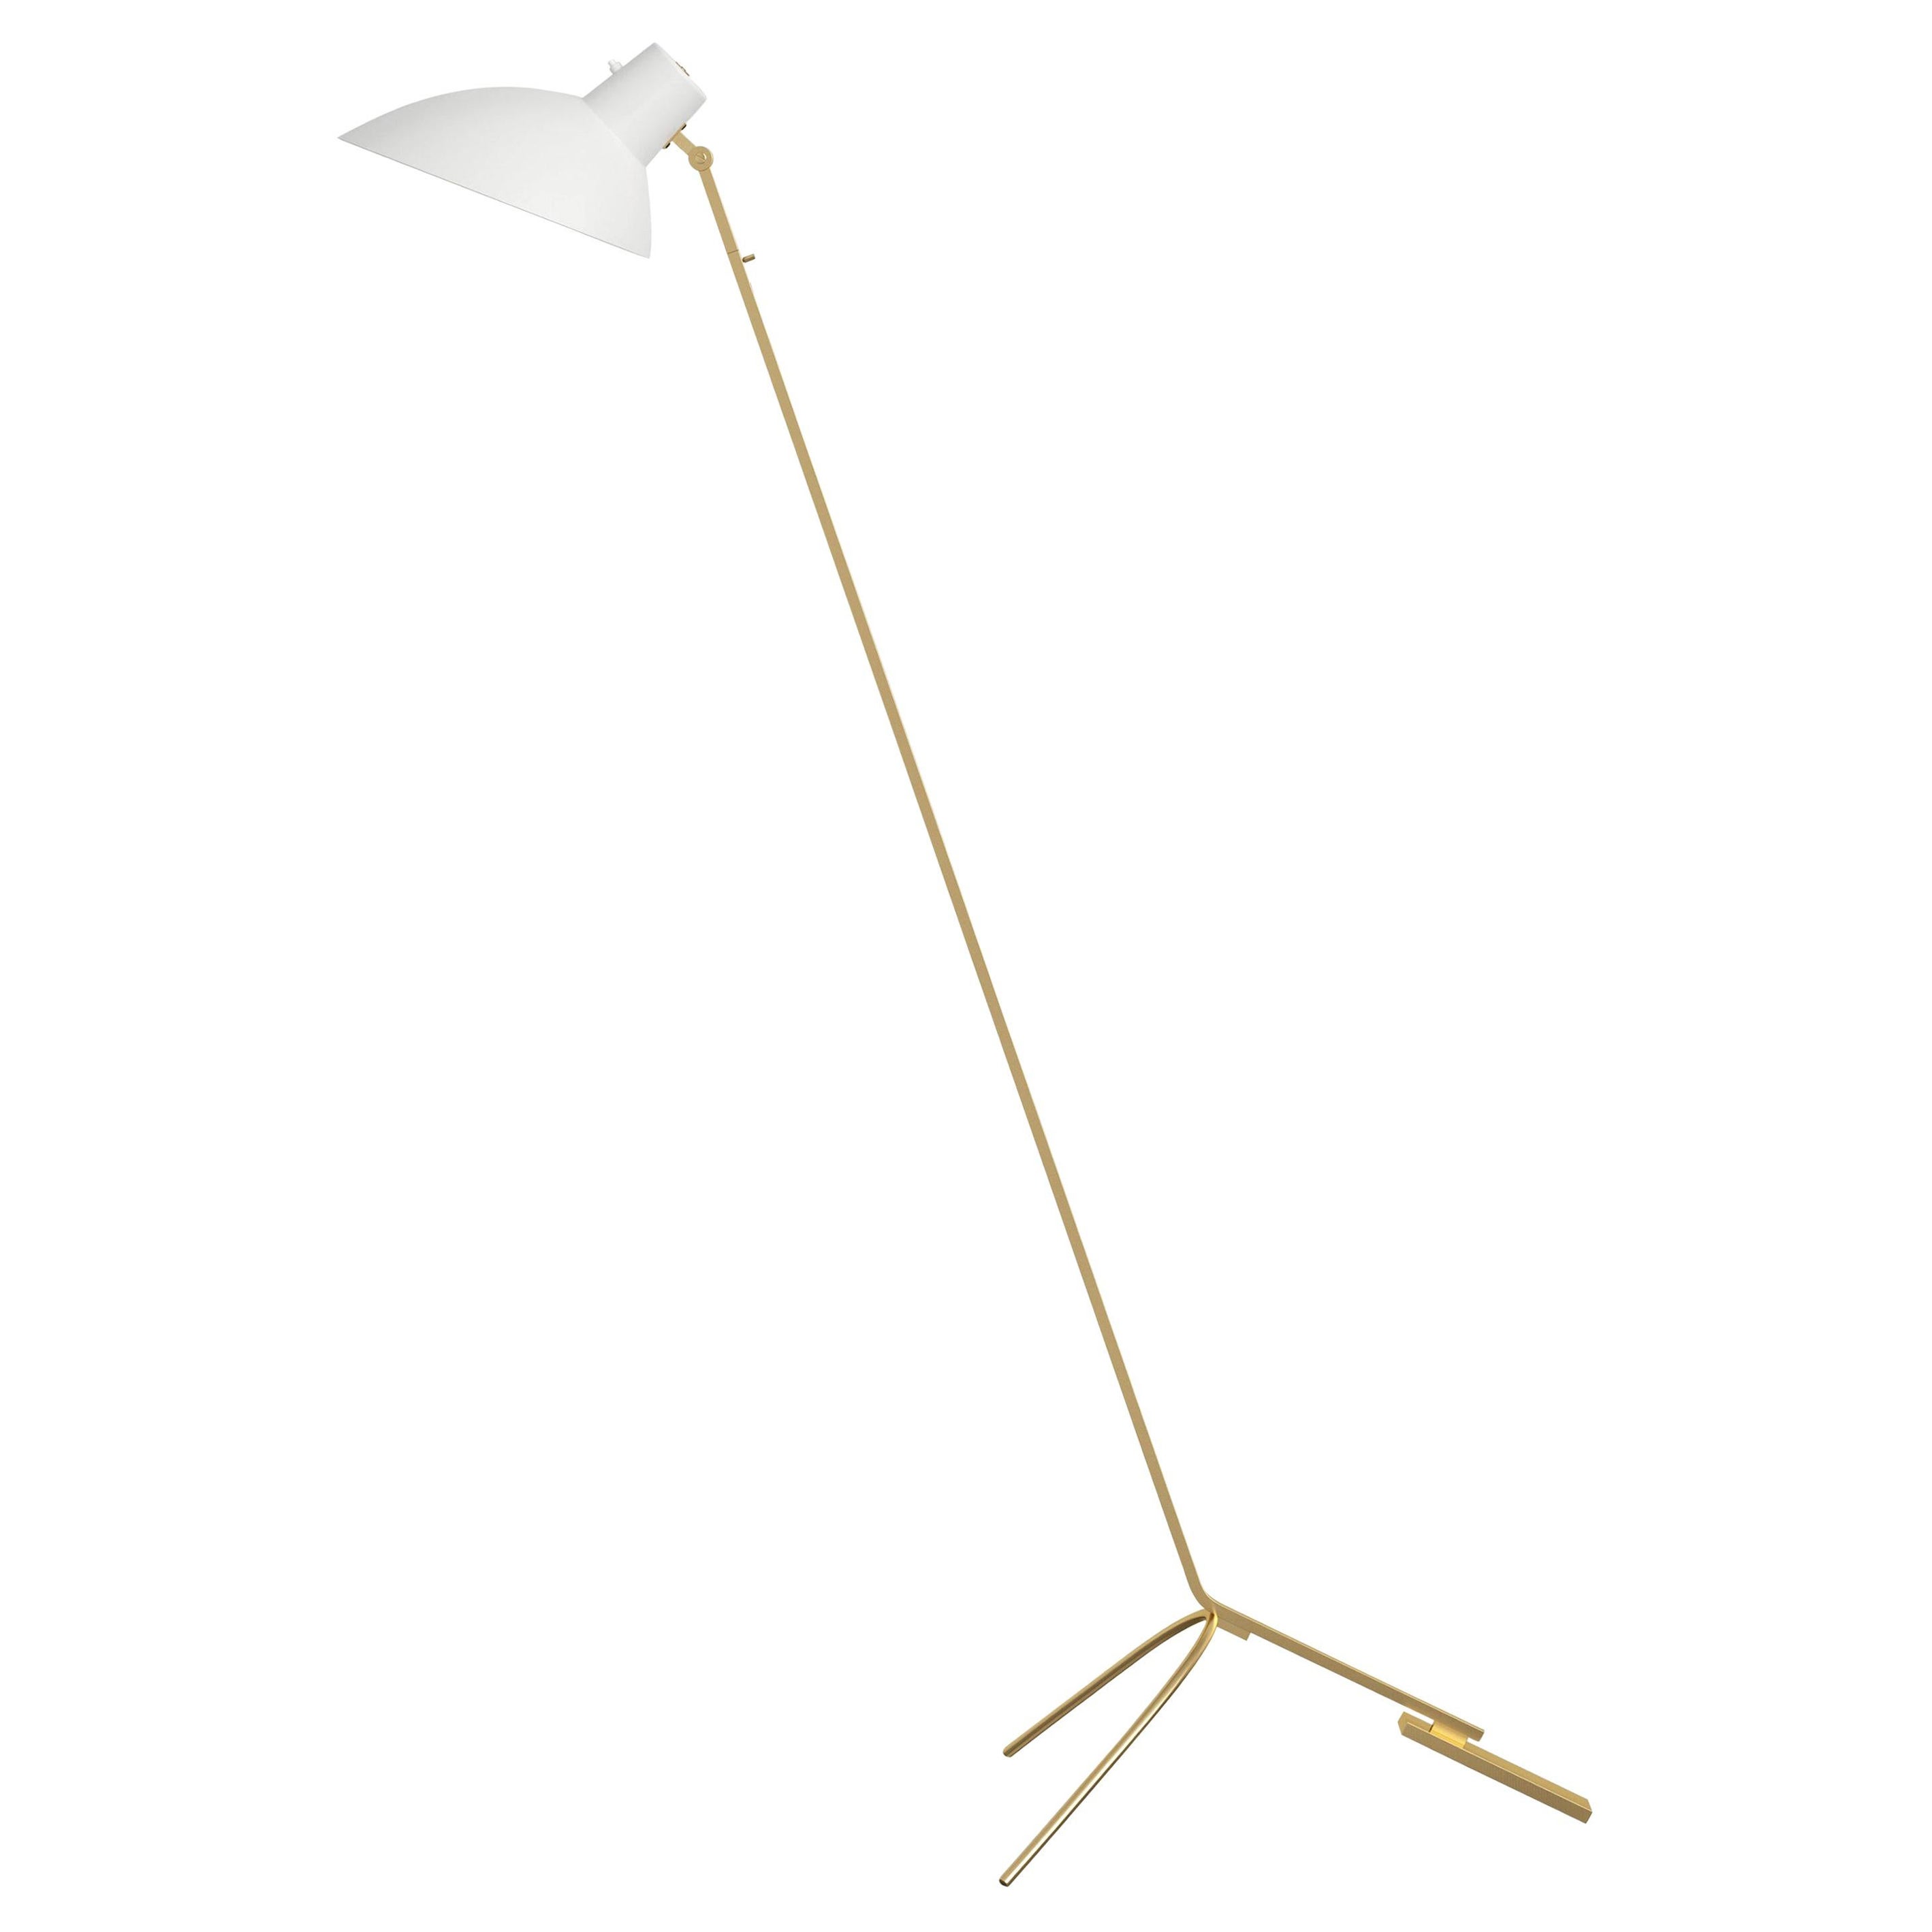 VV Cinquanta White and Brass Floor Lamp Designed by Vittoriano Viganò for Astep For Sale